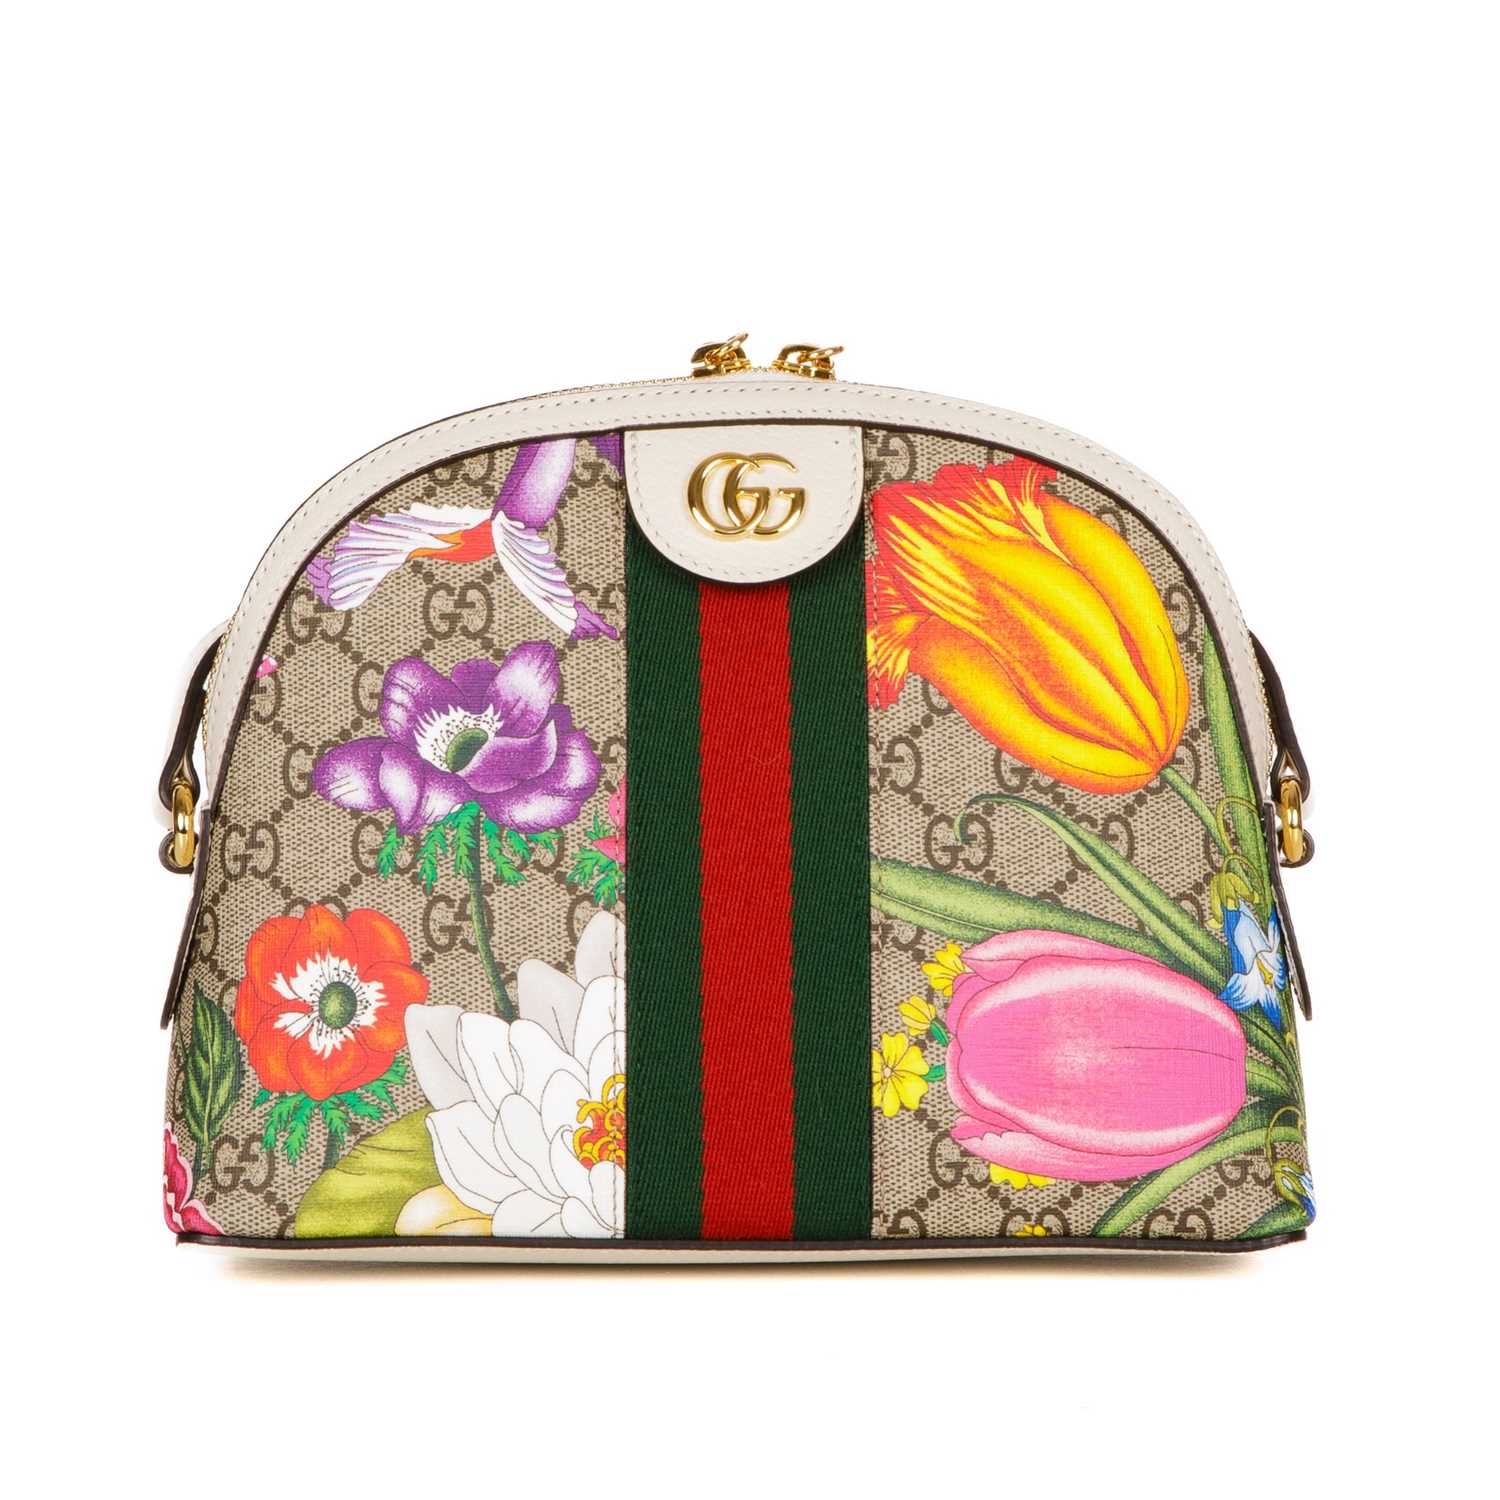 Gucci, a Supreme Floral Web Ophidia handbag, crafted from beige GG coated canvas, overlayed with